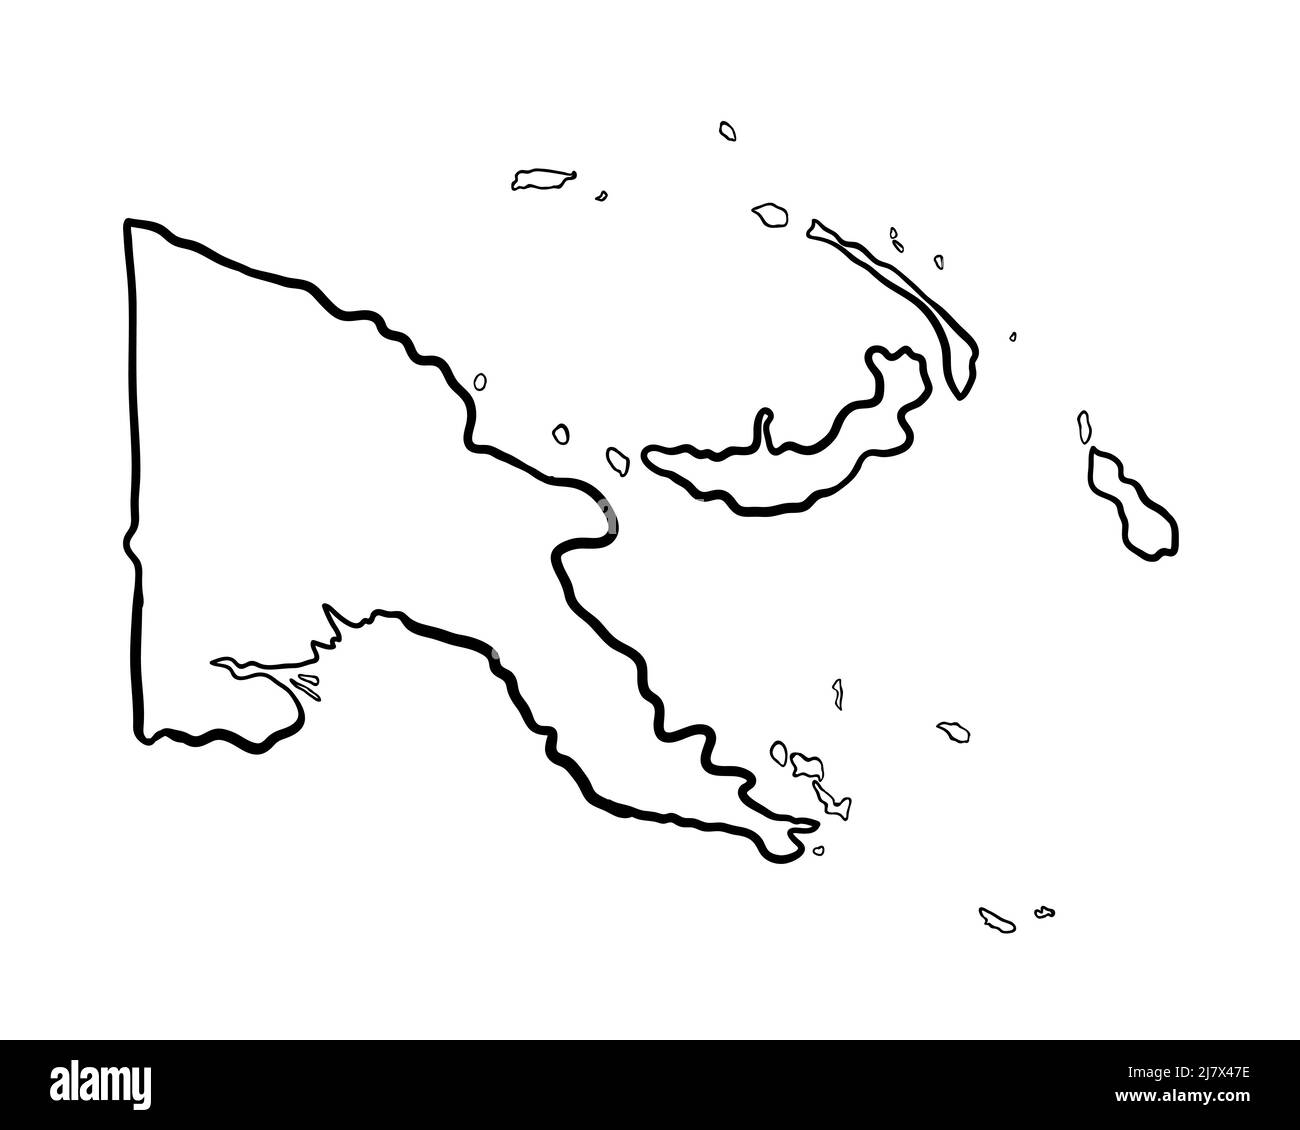 Papua New Guinea - Hand-Drawn Map lllustration Stock Photo